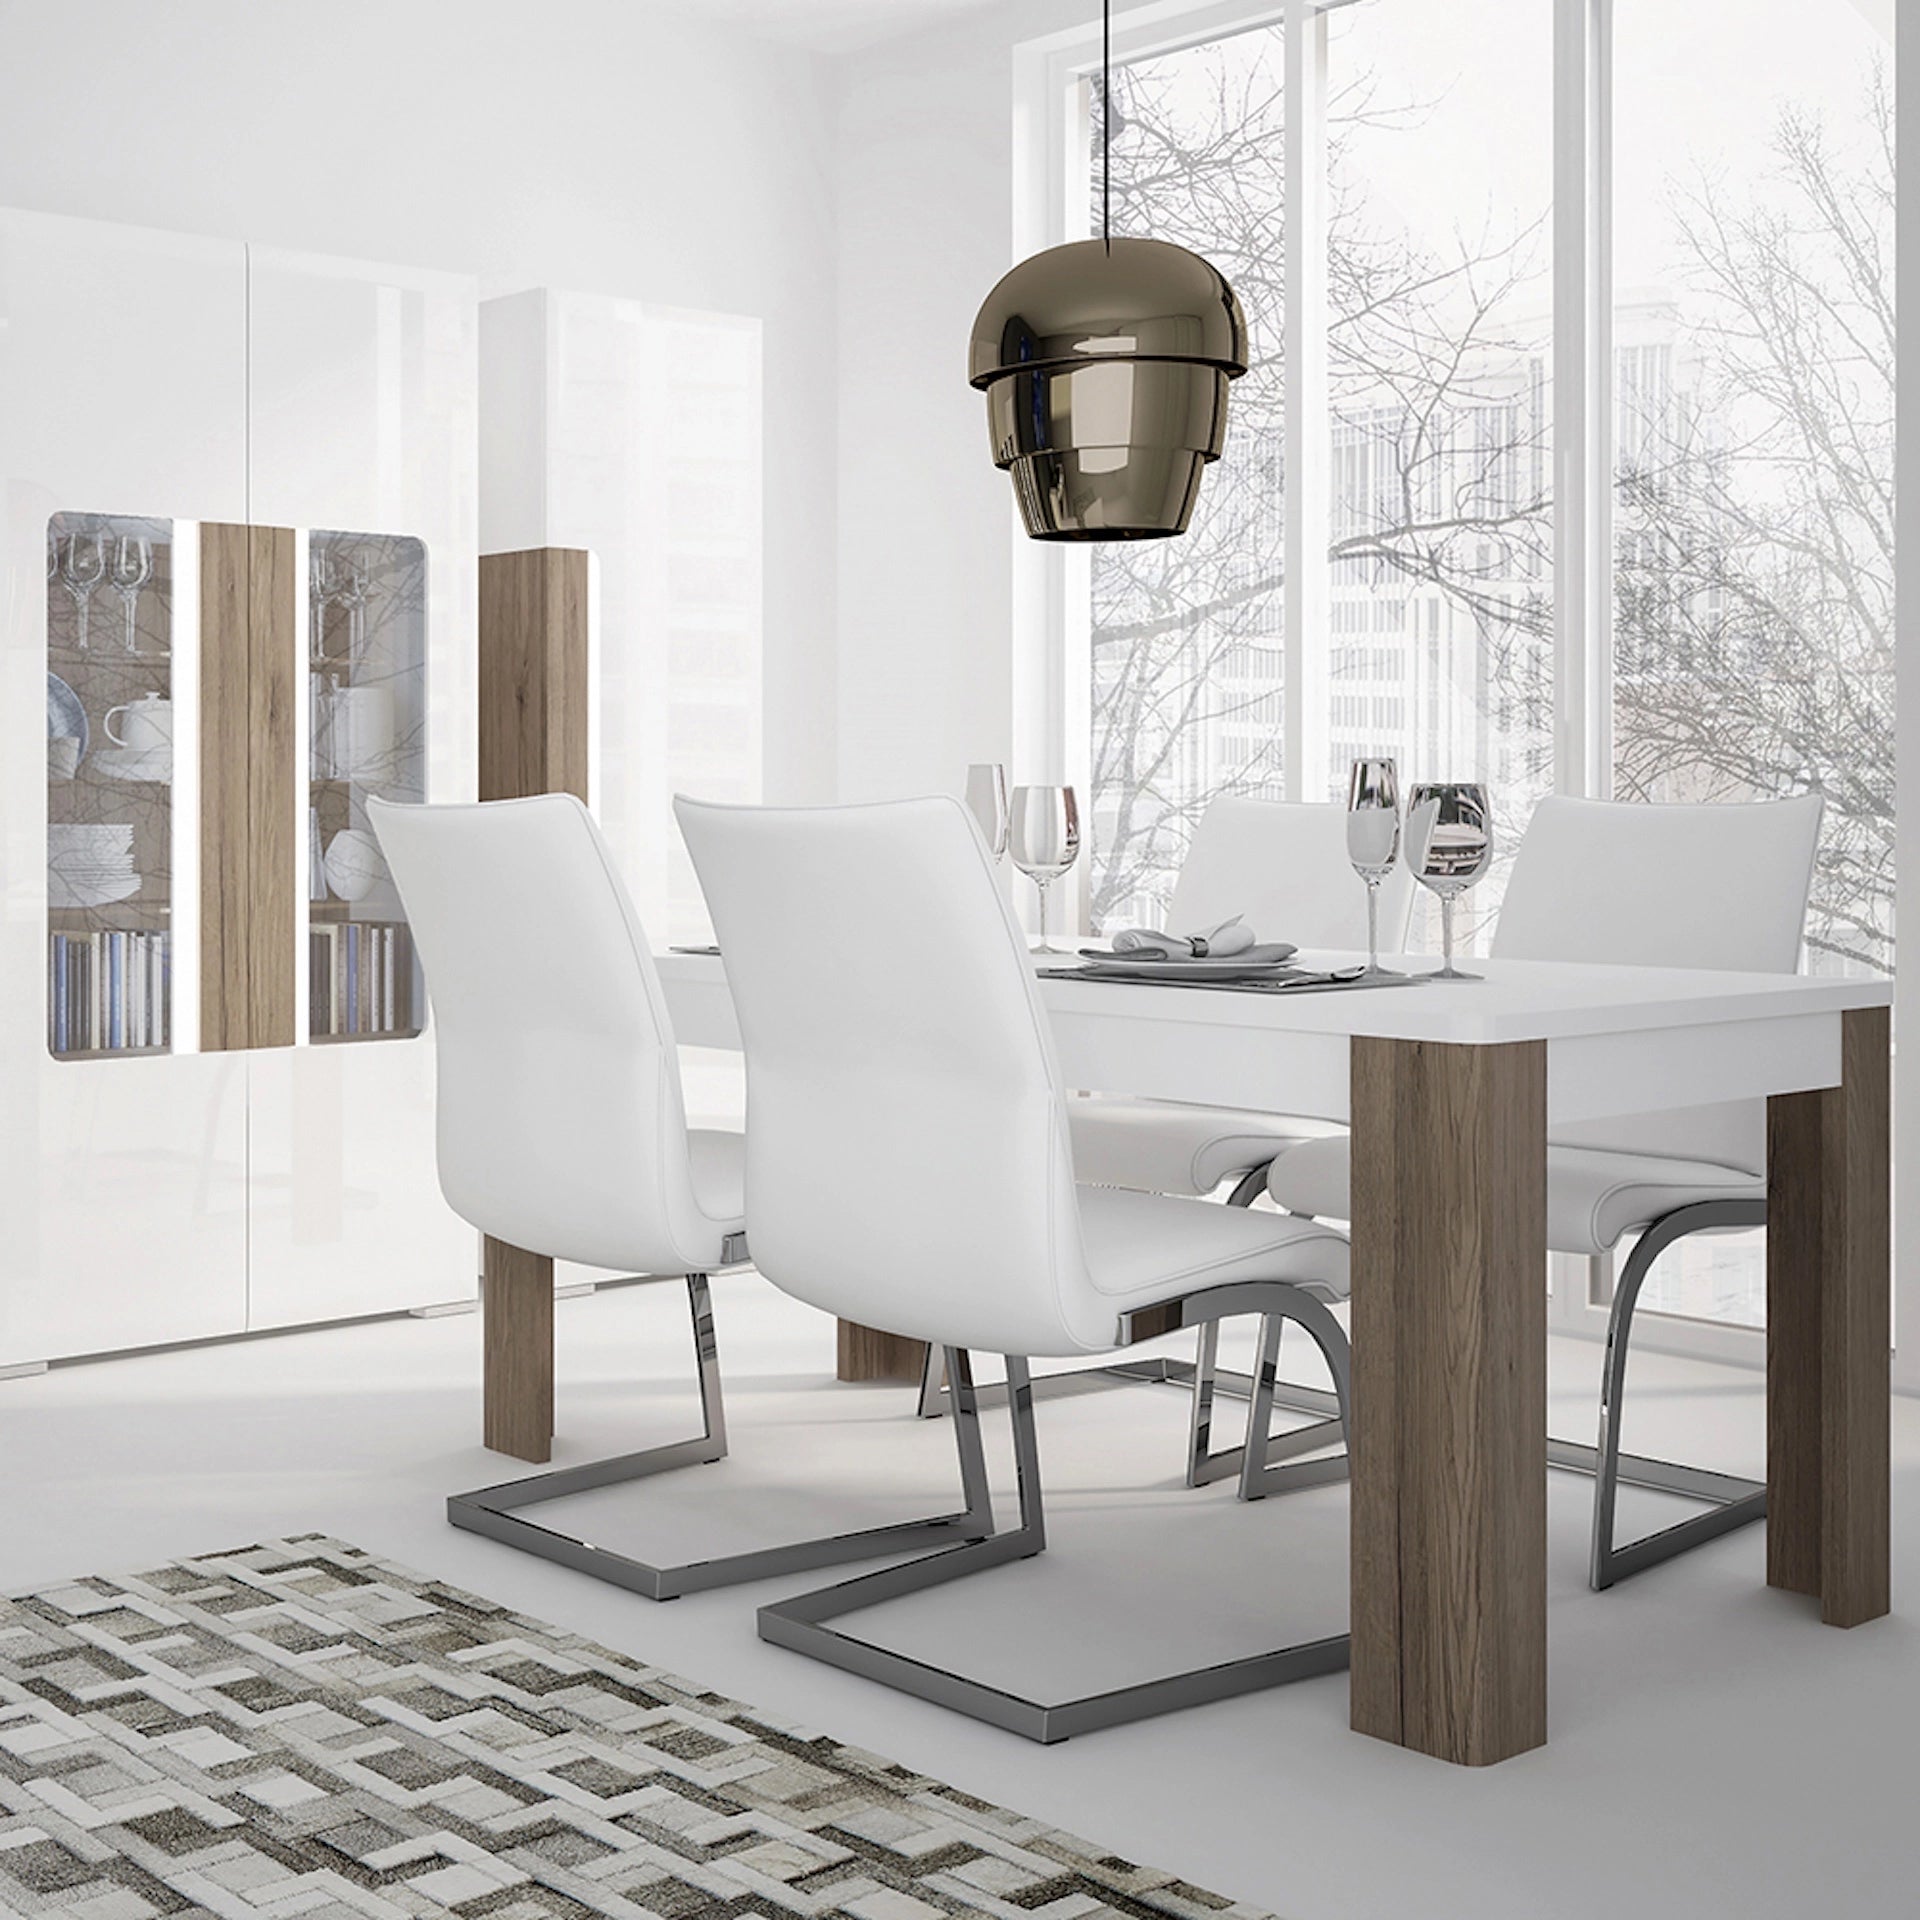 Furniture To Go Toronto 160cm Dining Table in White & Oak